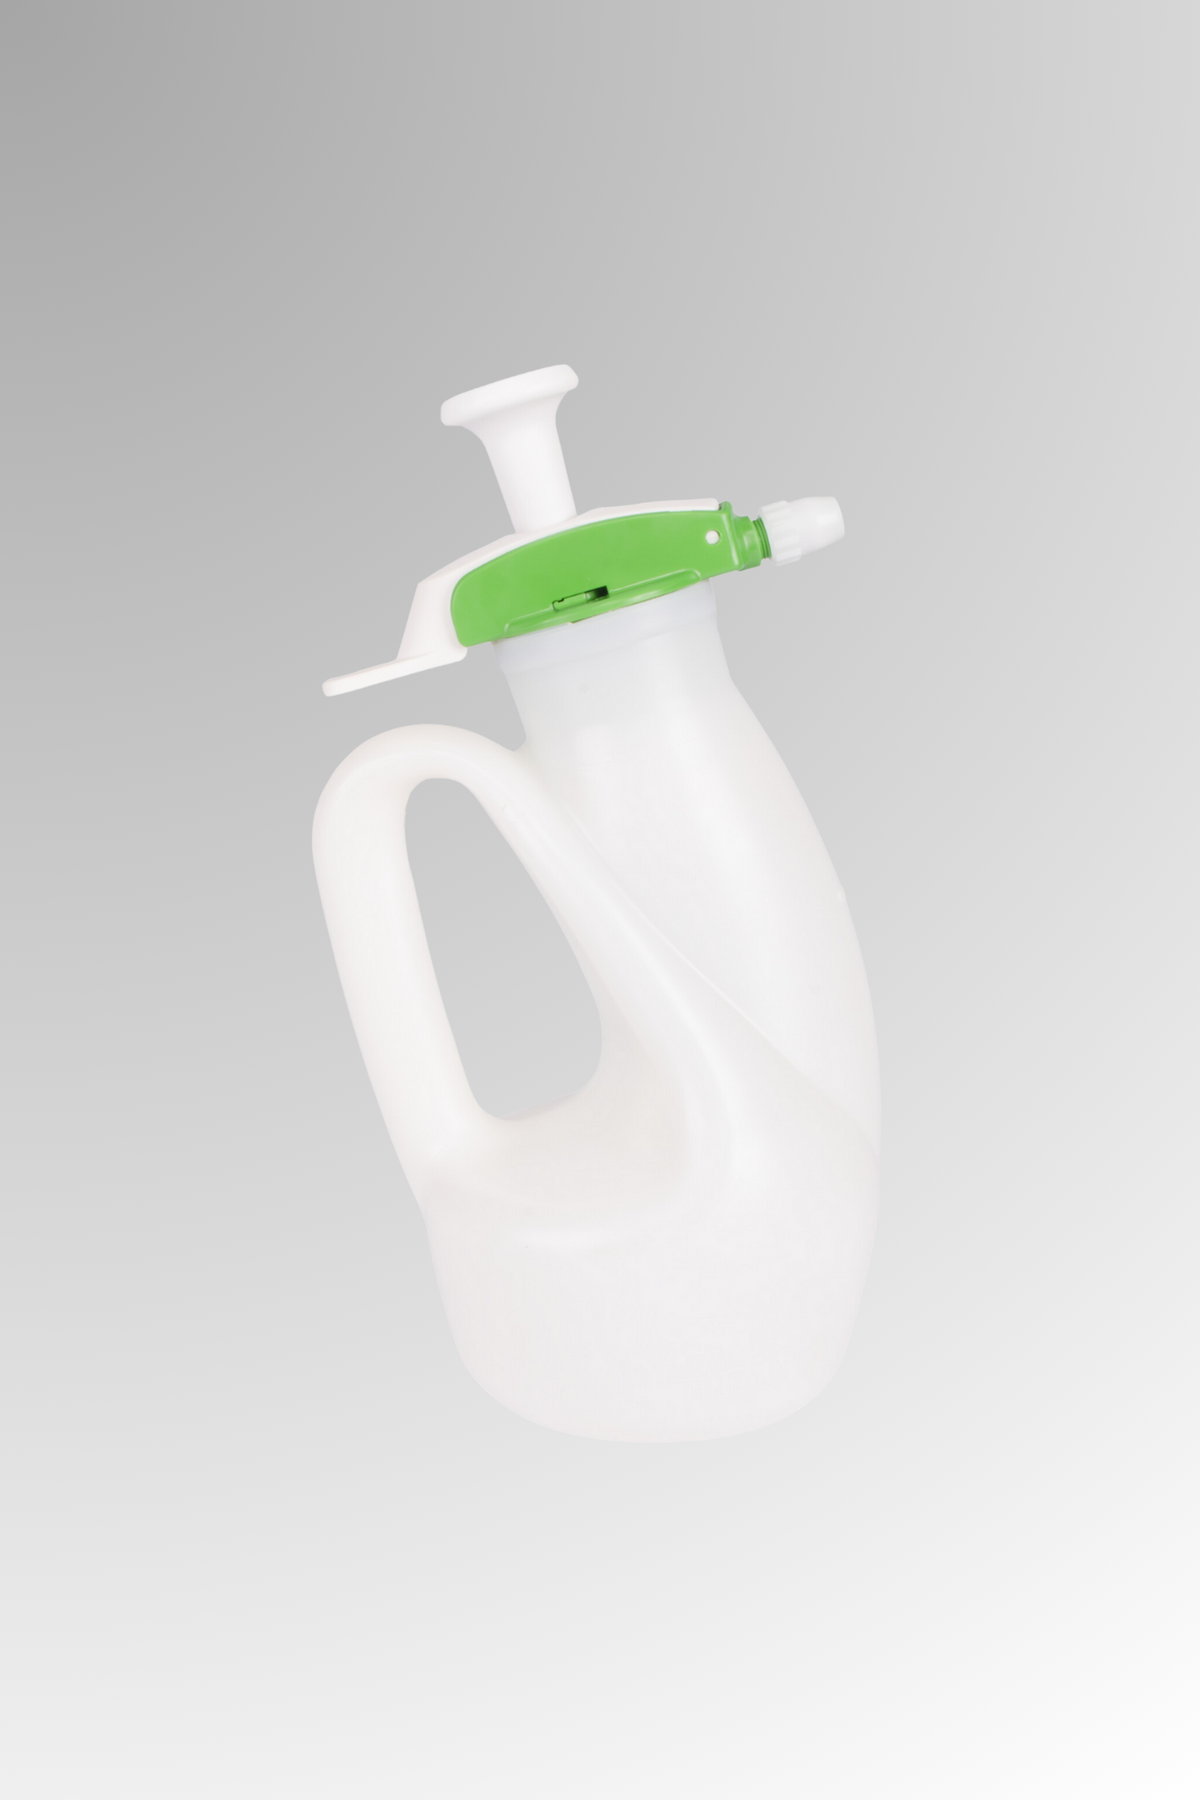 Compression Sprayer 1.2 Litres - The Duck